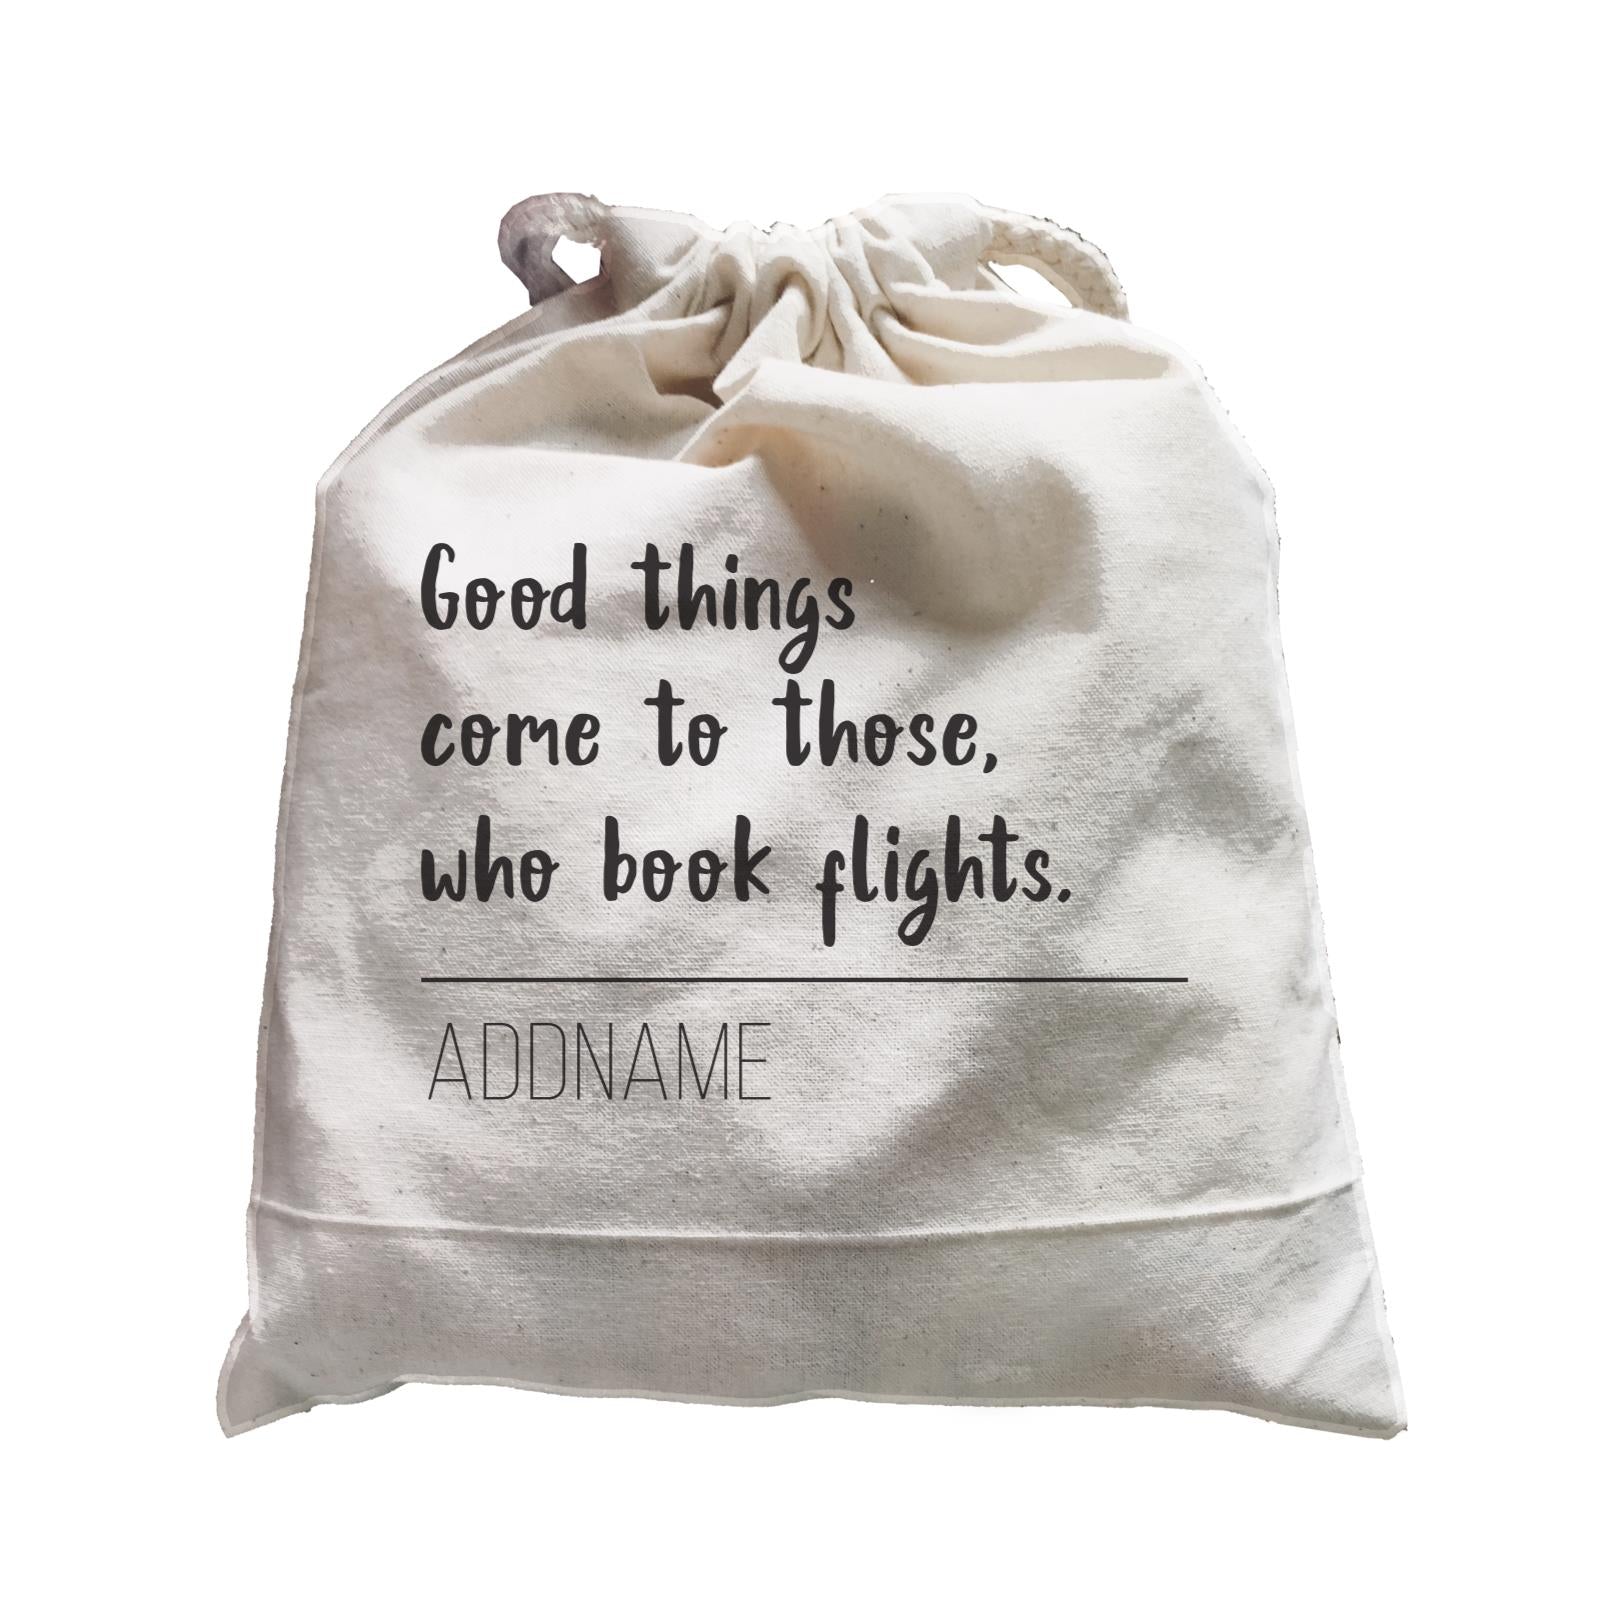 Travel Quotes Good Things Come To Those Who Book Flights Addname Satchel